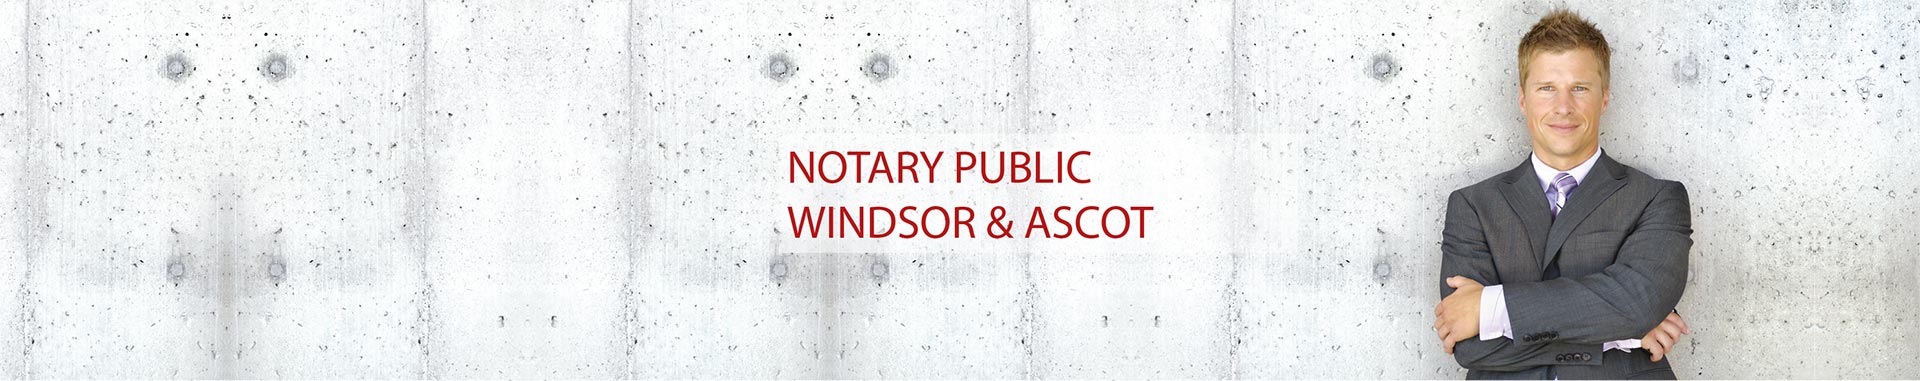 Notary Public Windsor & Ascot